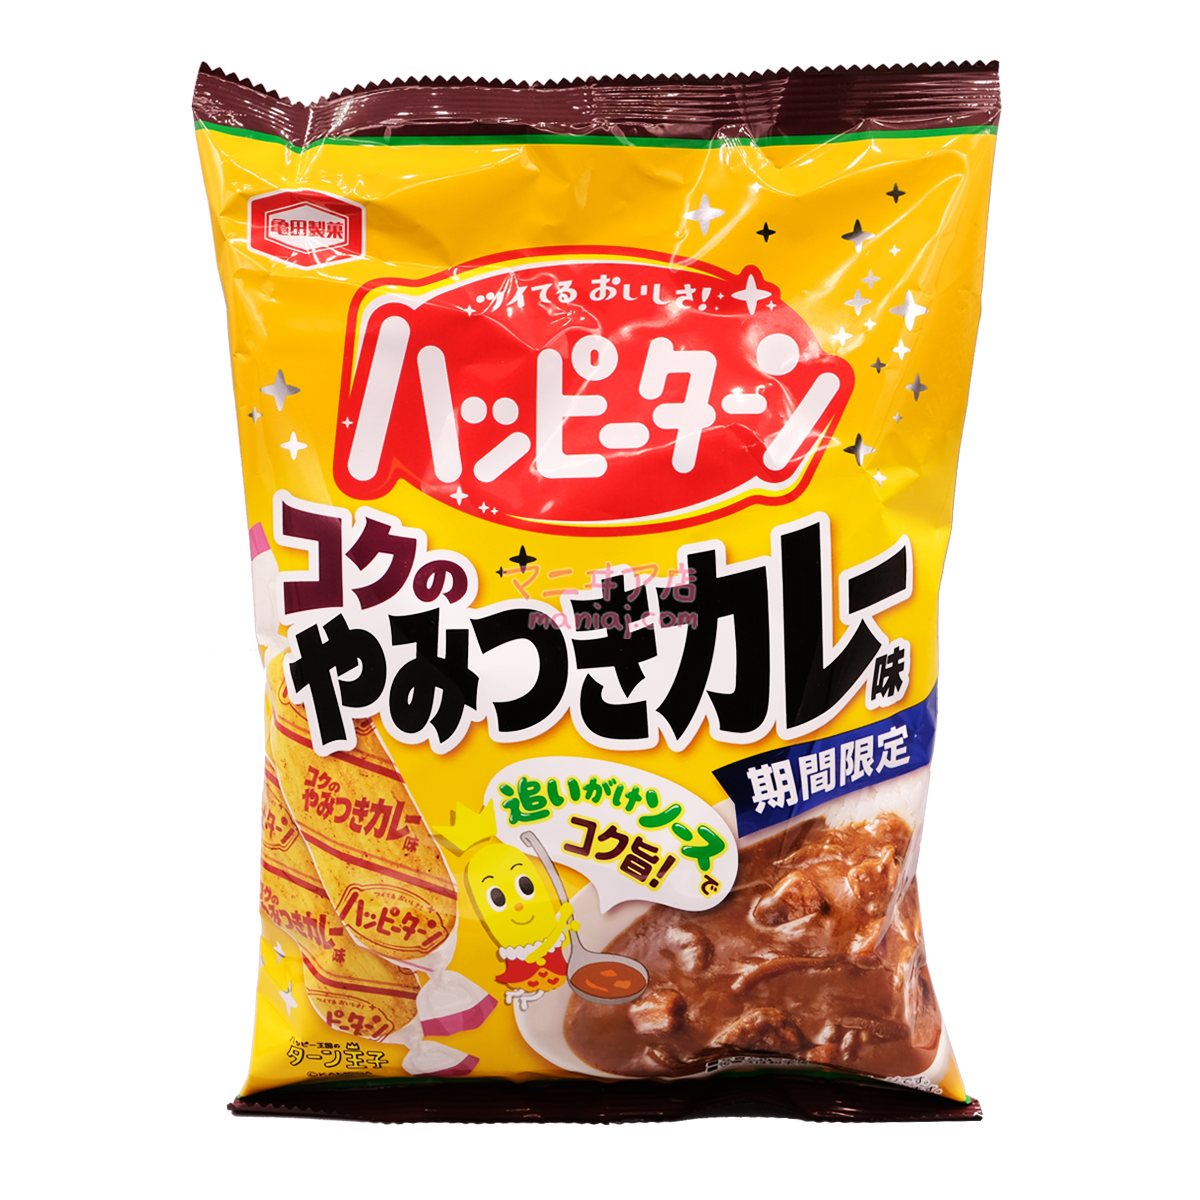 Addictive Curry Flavored Rice Crackers